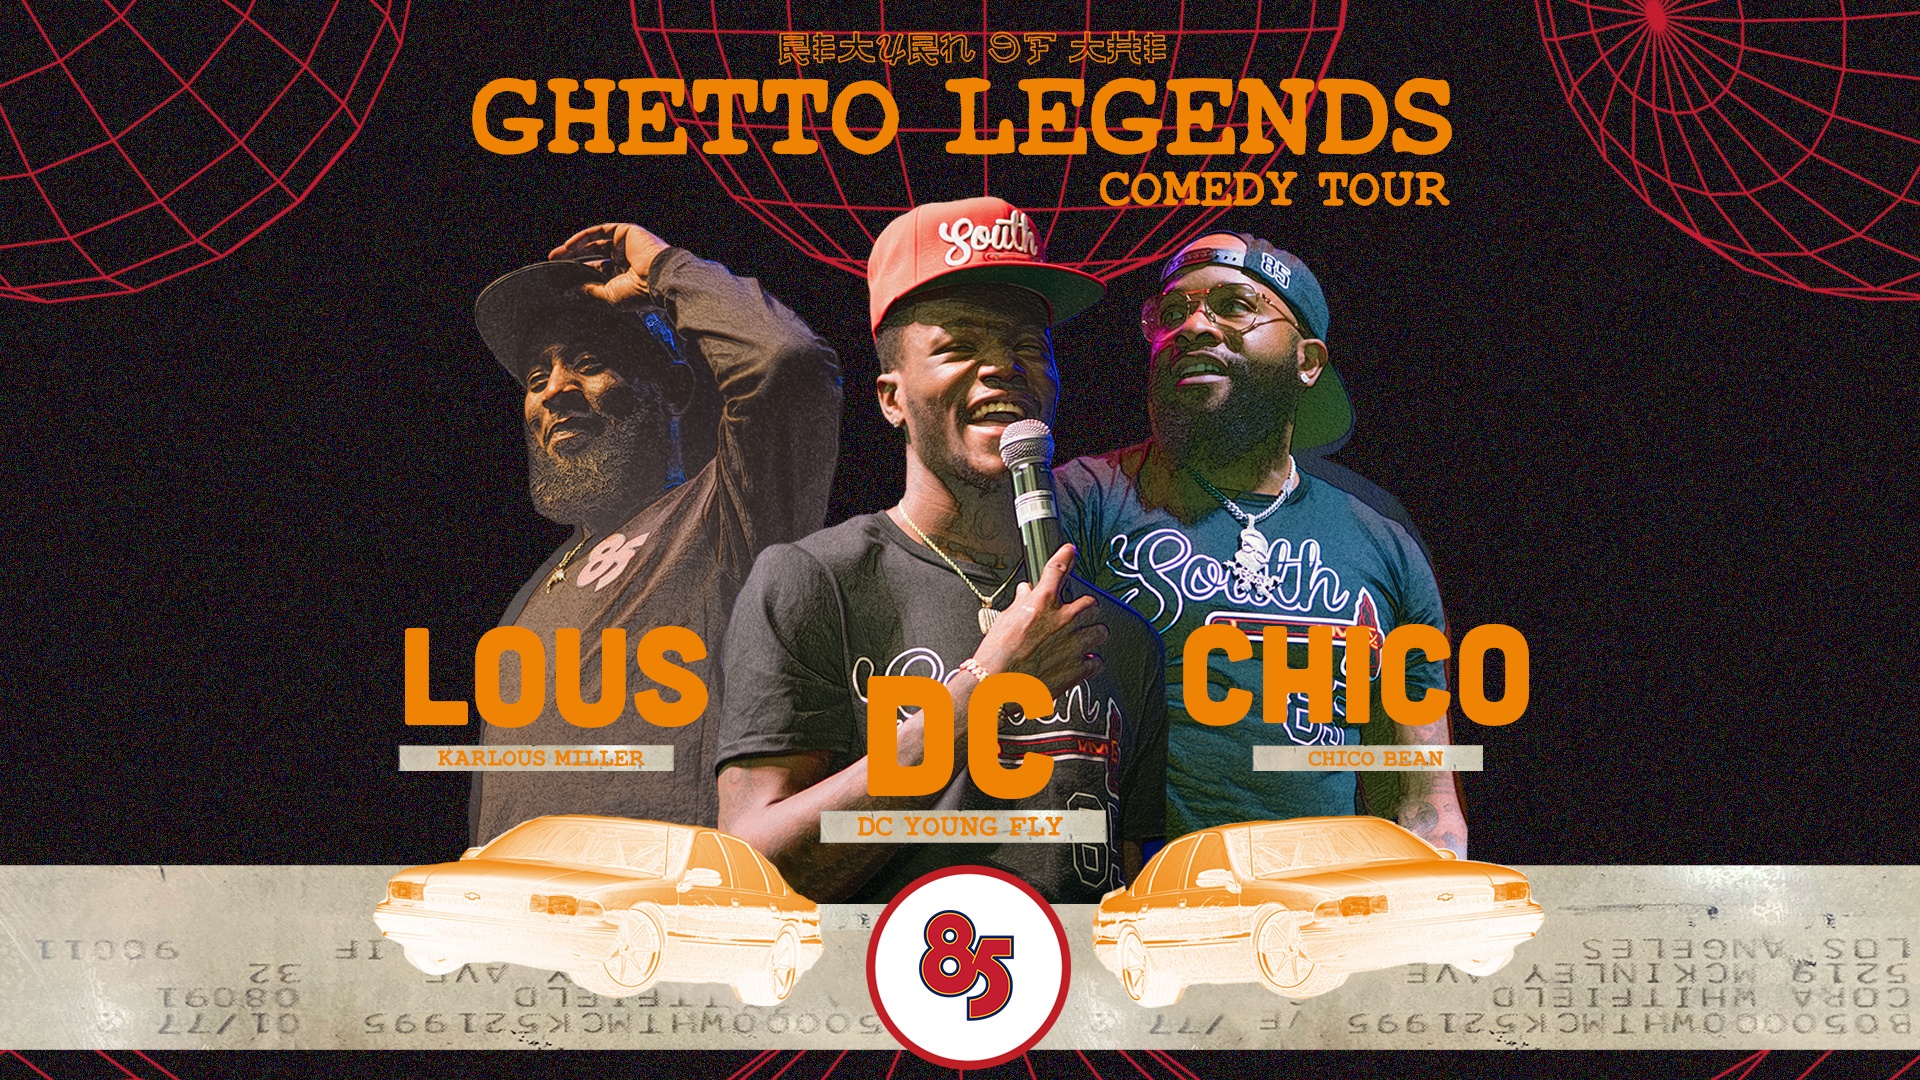 85 South Show Starring DC Young Fly, Karlous Miller, Chico Bean Coming to Phoenix’s Footprint Center on October 16